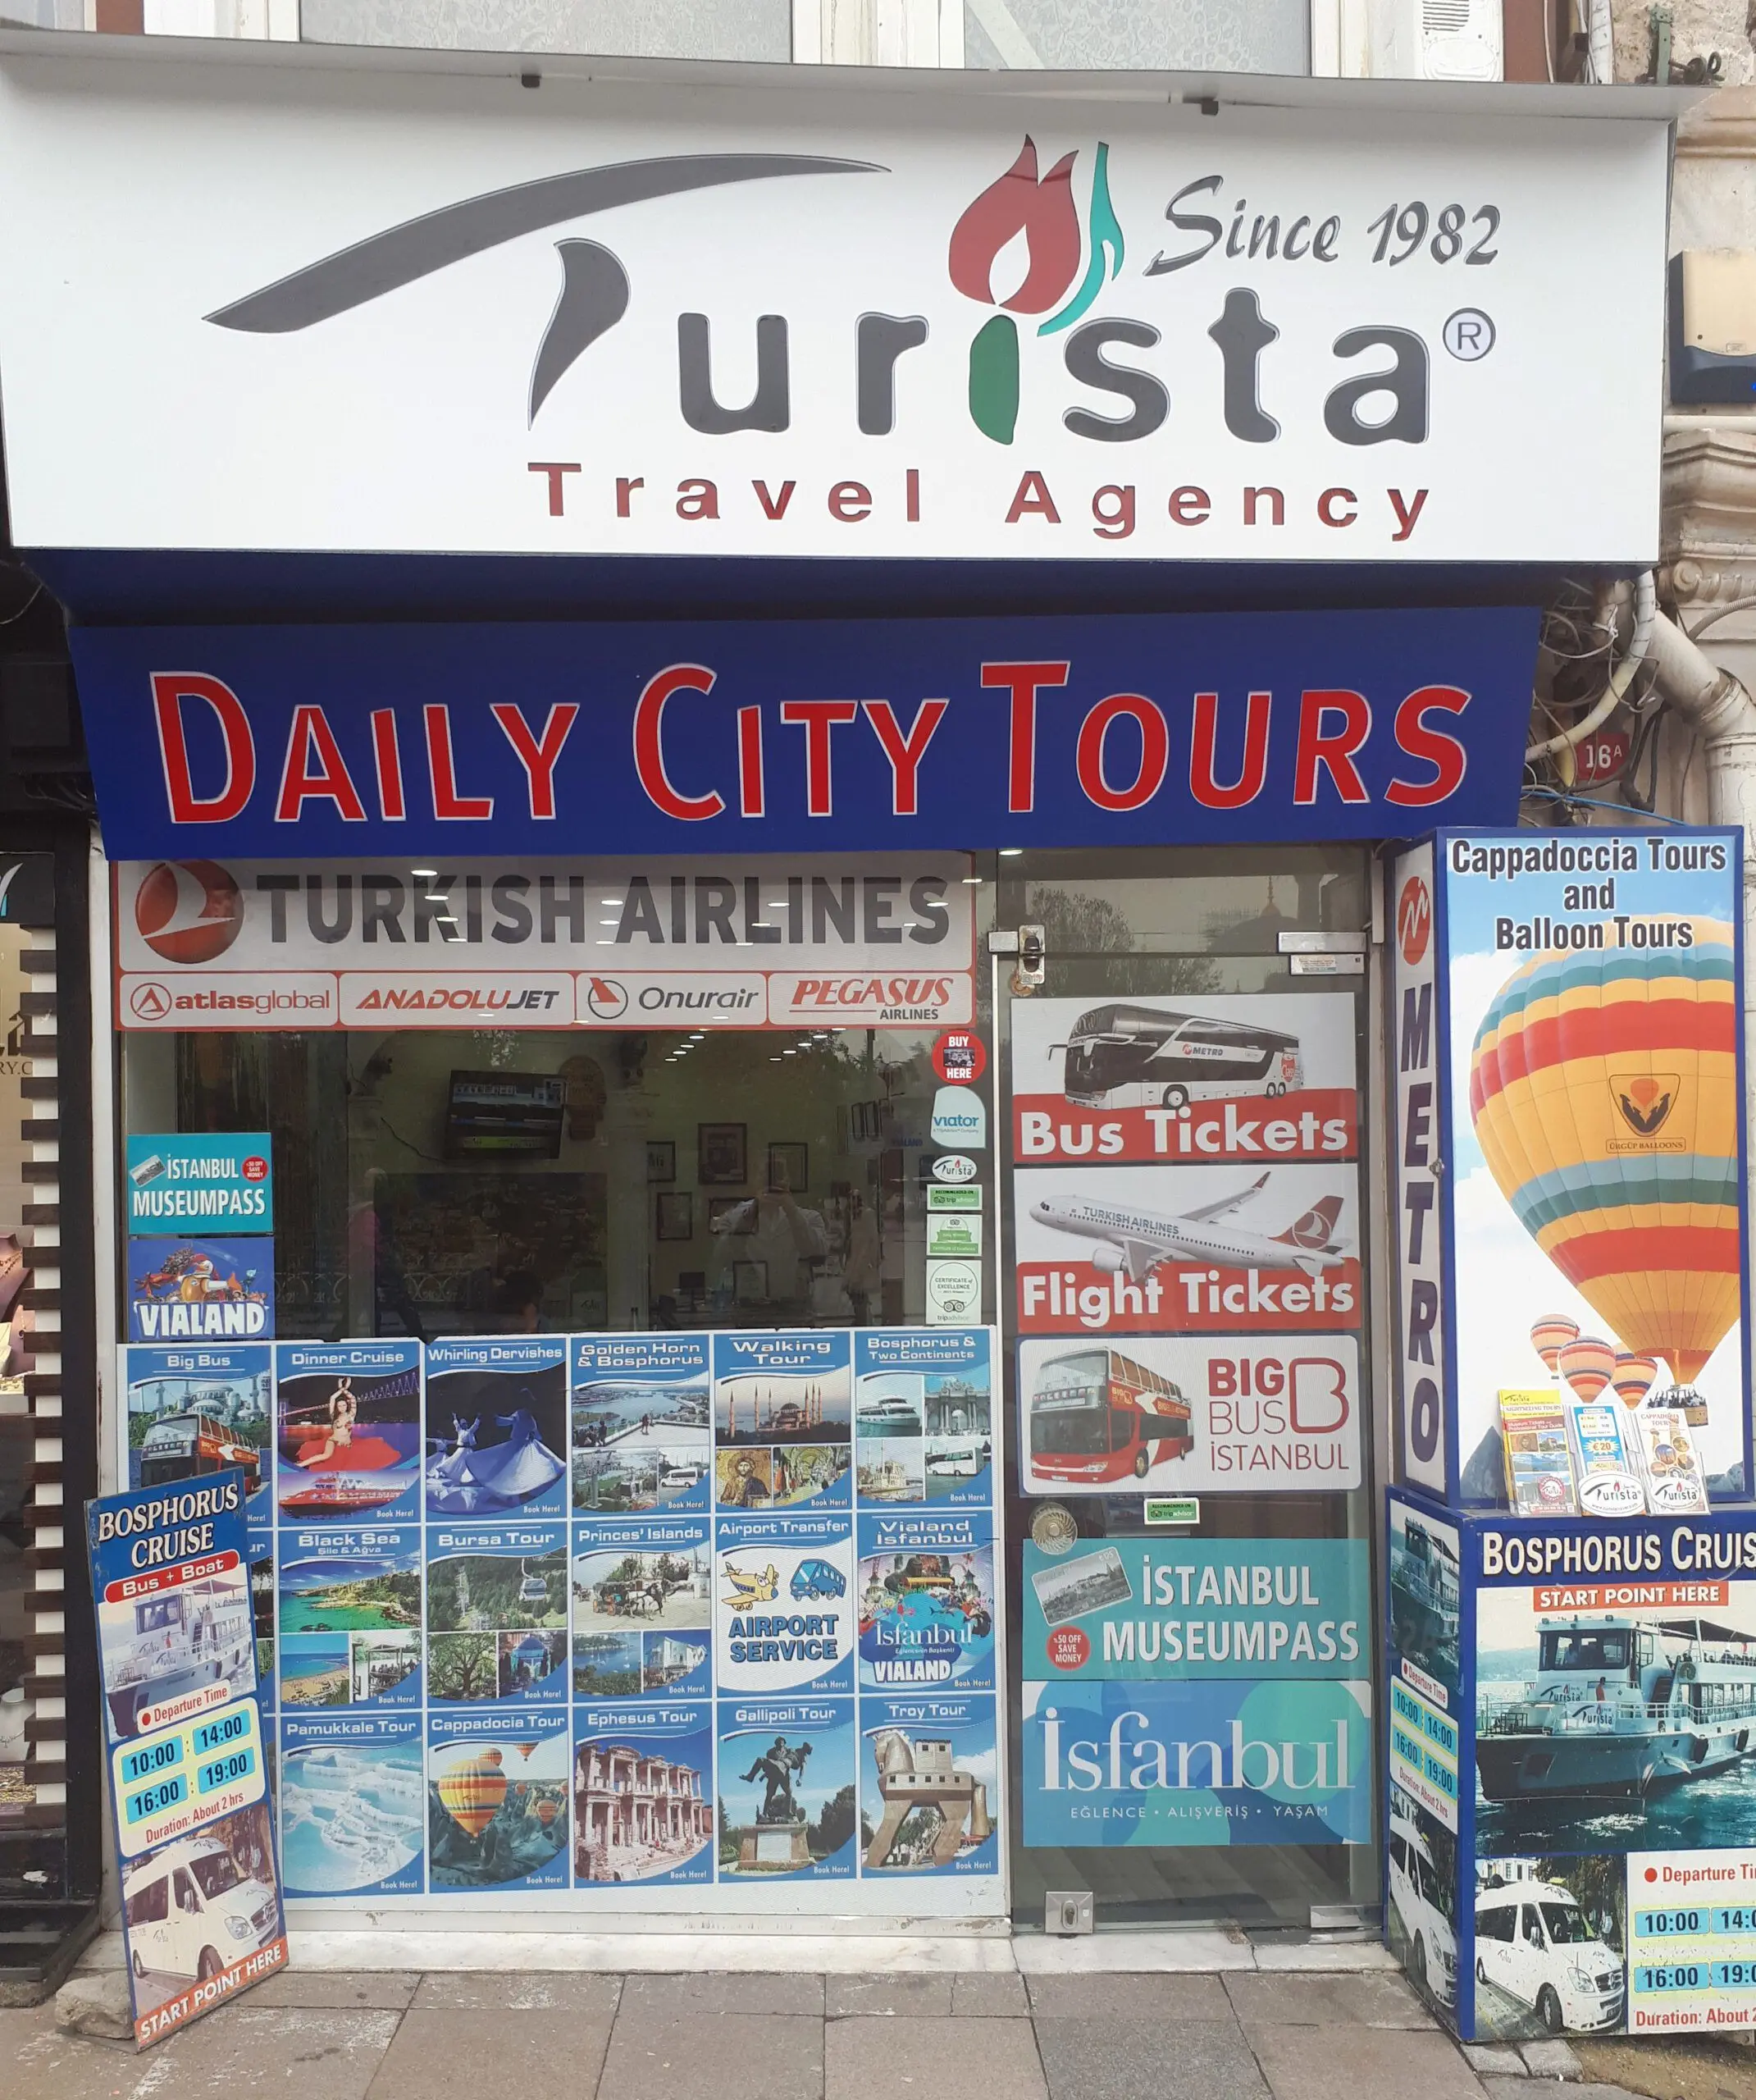 Contact Us; Turista Travel Sales Office